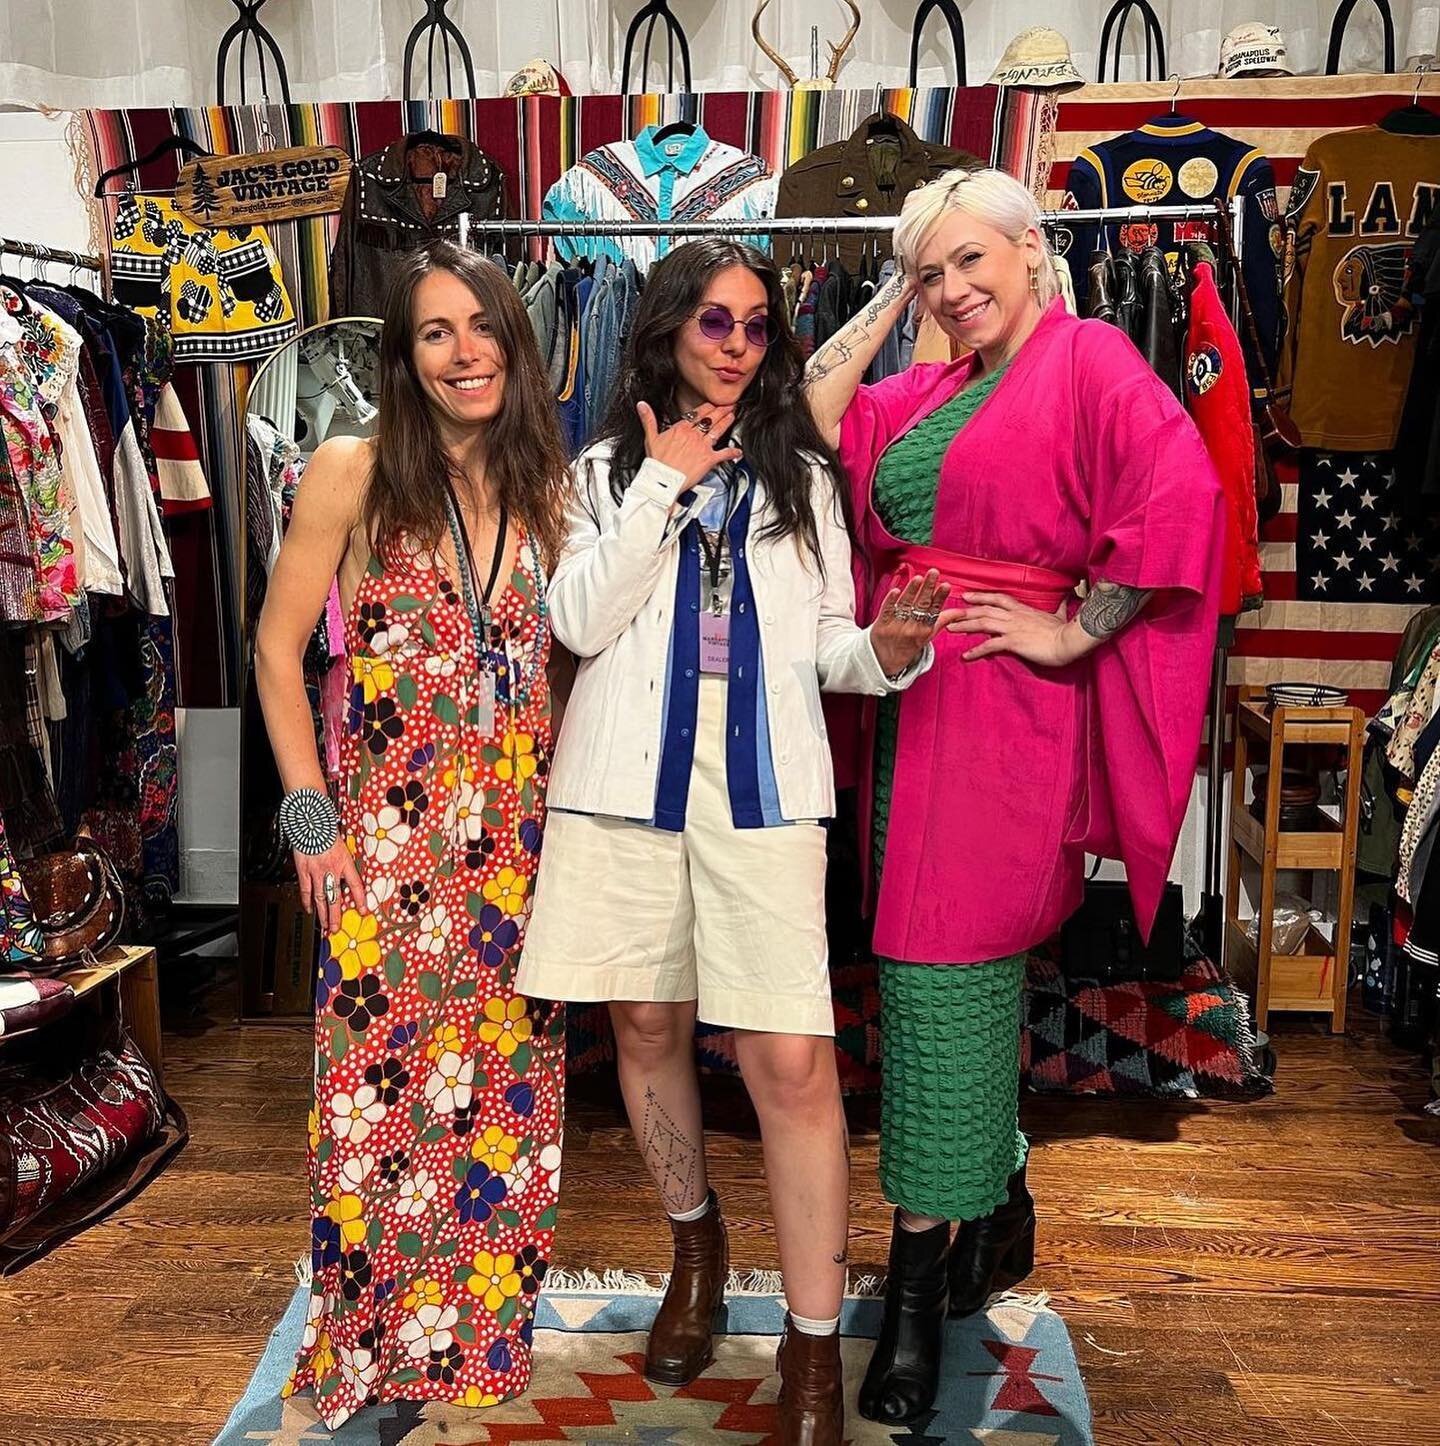 Dealer appreciation post!!! Comment your favorite dealer memory ❤️✨ Counting down for the next October 20-21st&hellip;  #manhattanvintageshow #thevintageshow #vintageforall #manhattanvintage